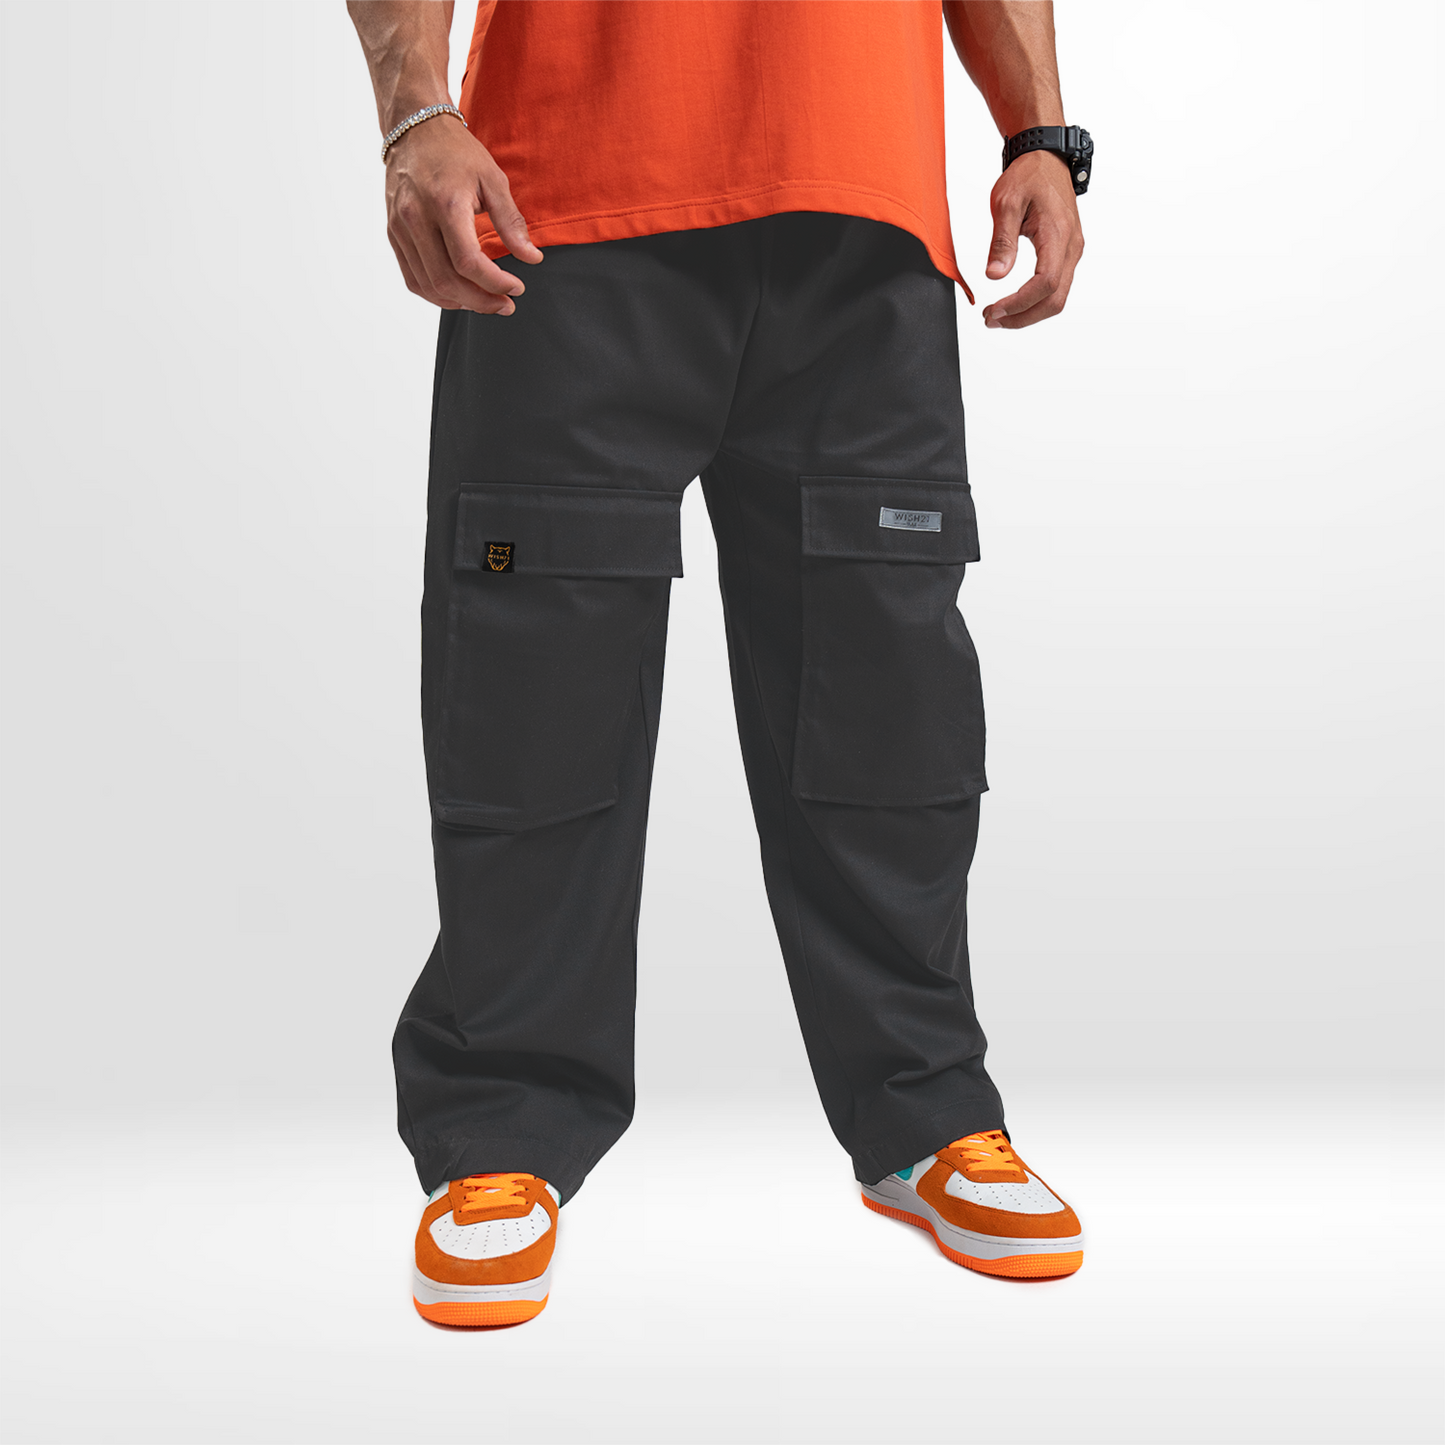 MEN'S OVERSIZE STYLE TROUSERS